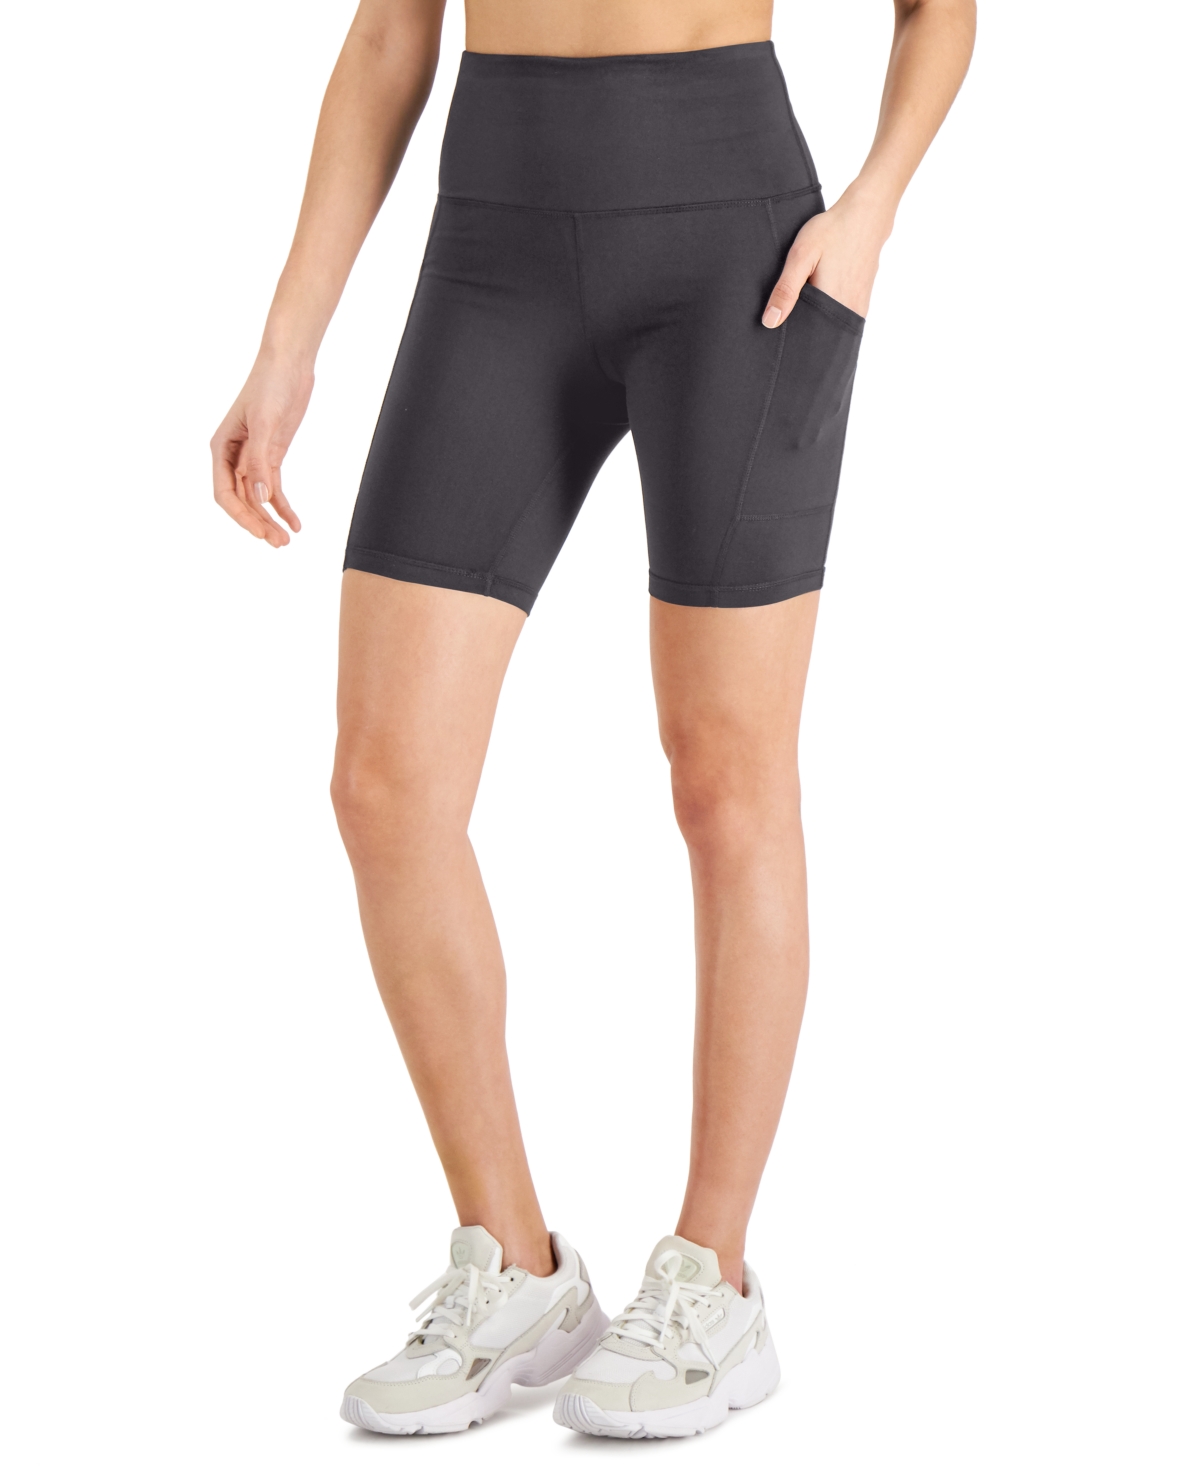 ID IDEOLOGY WOMEN'S COMPRESSION 7" BIKE SHORTS, CREATED FOR MACY'S